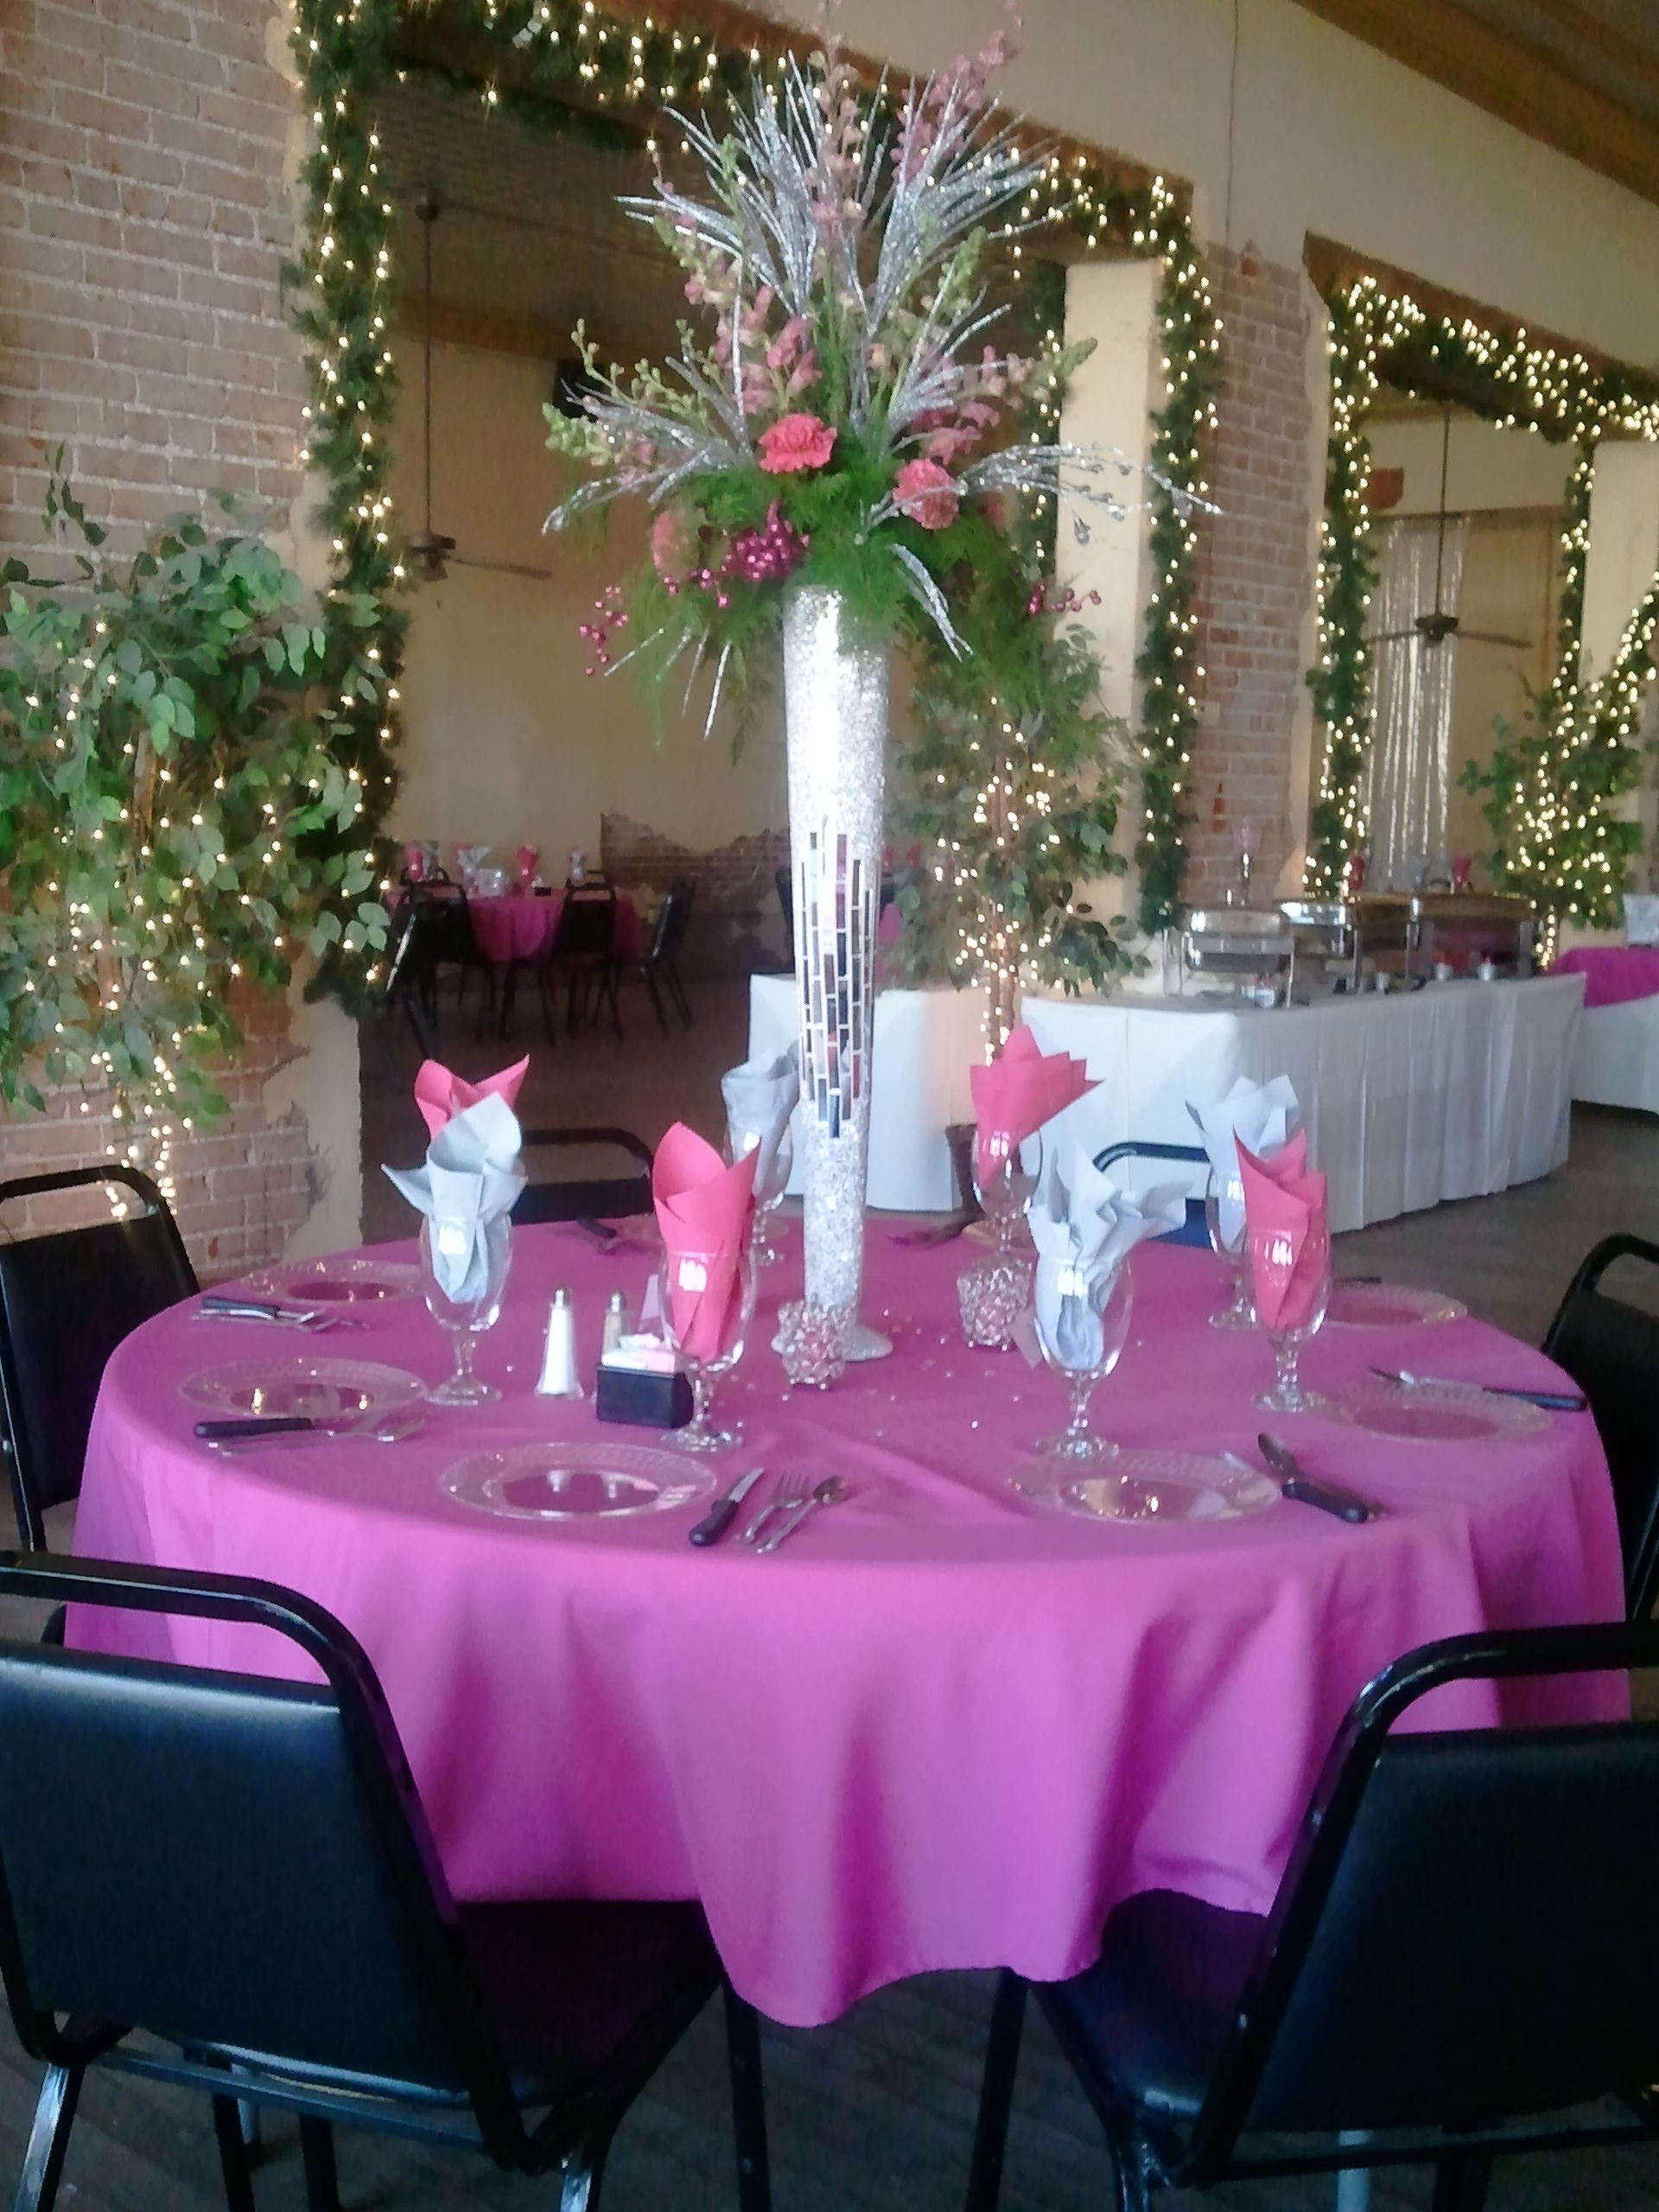 14 Lovable Hot Pink Vase 2024 free download hot pink vase of hot pink and chic hot pink white and silver wedding the tall throughout hot pink and chic hot pink white and silver wedding the tall mirrored vase adds drama and elegance th